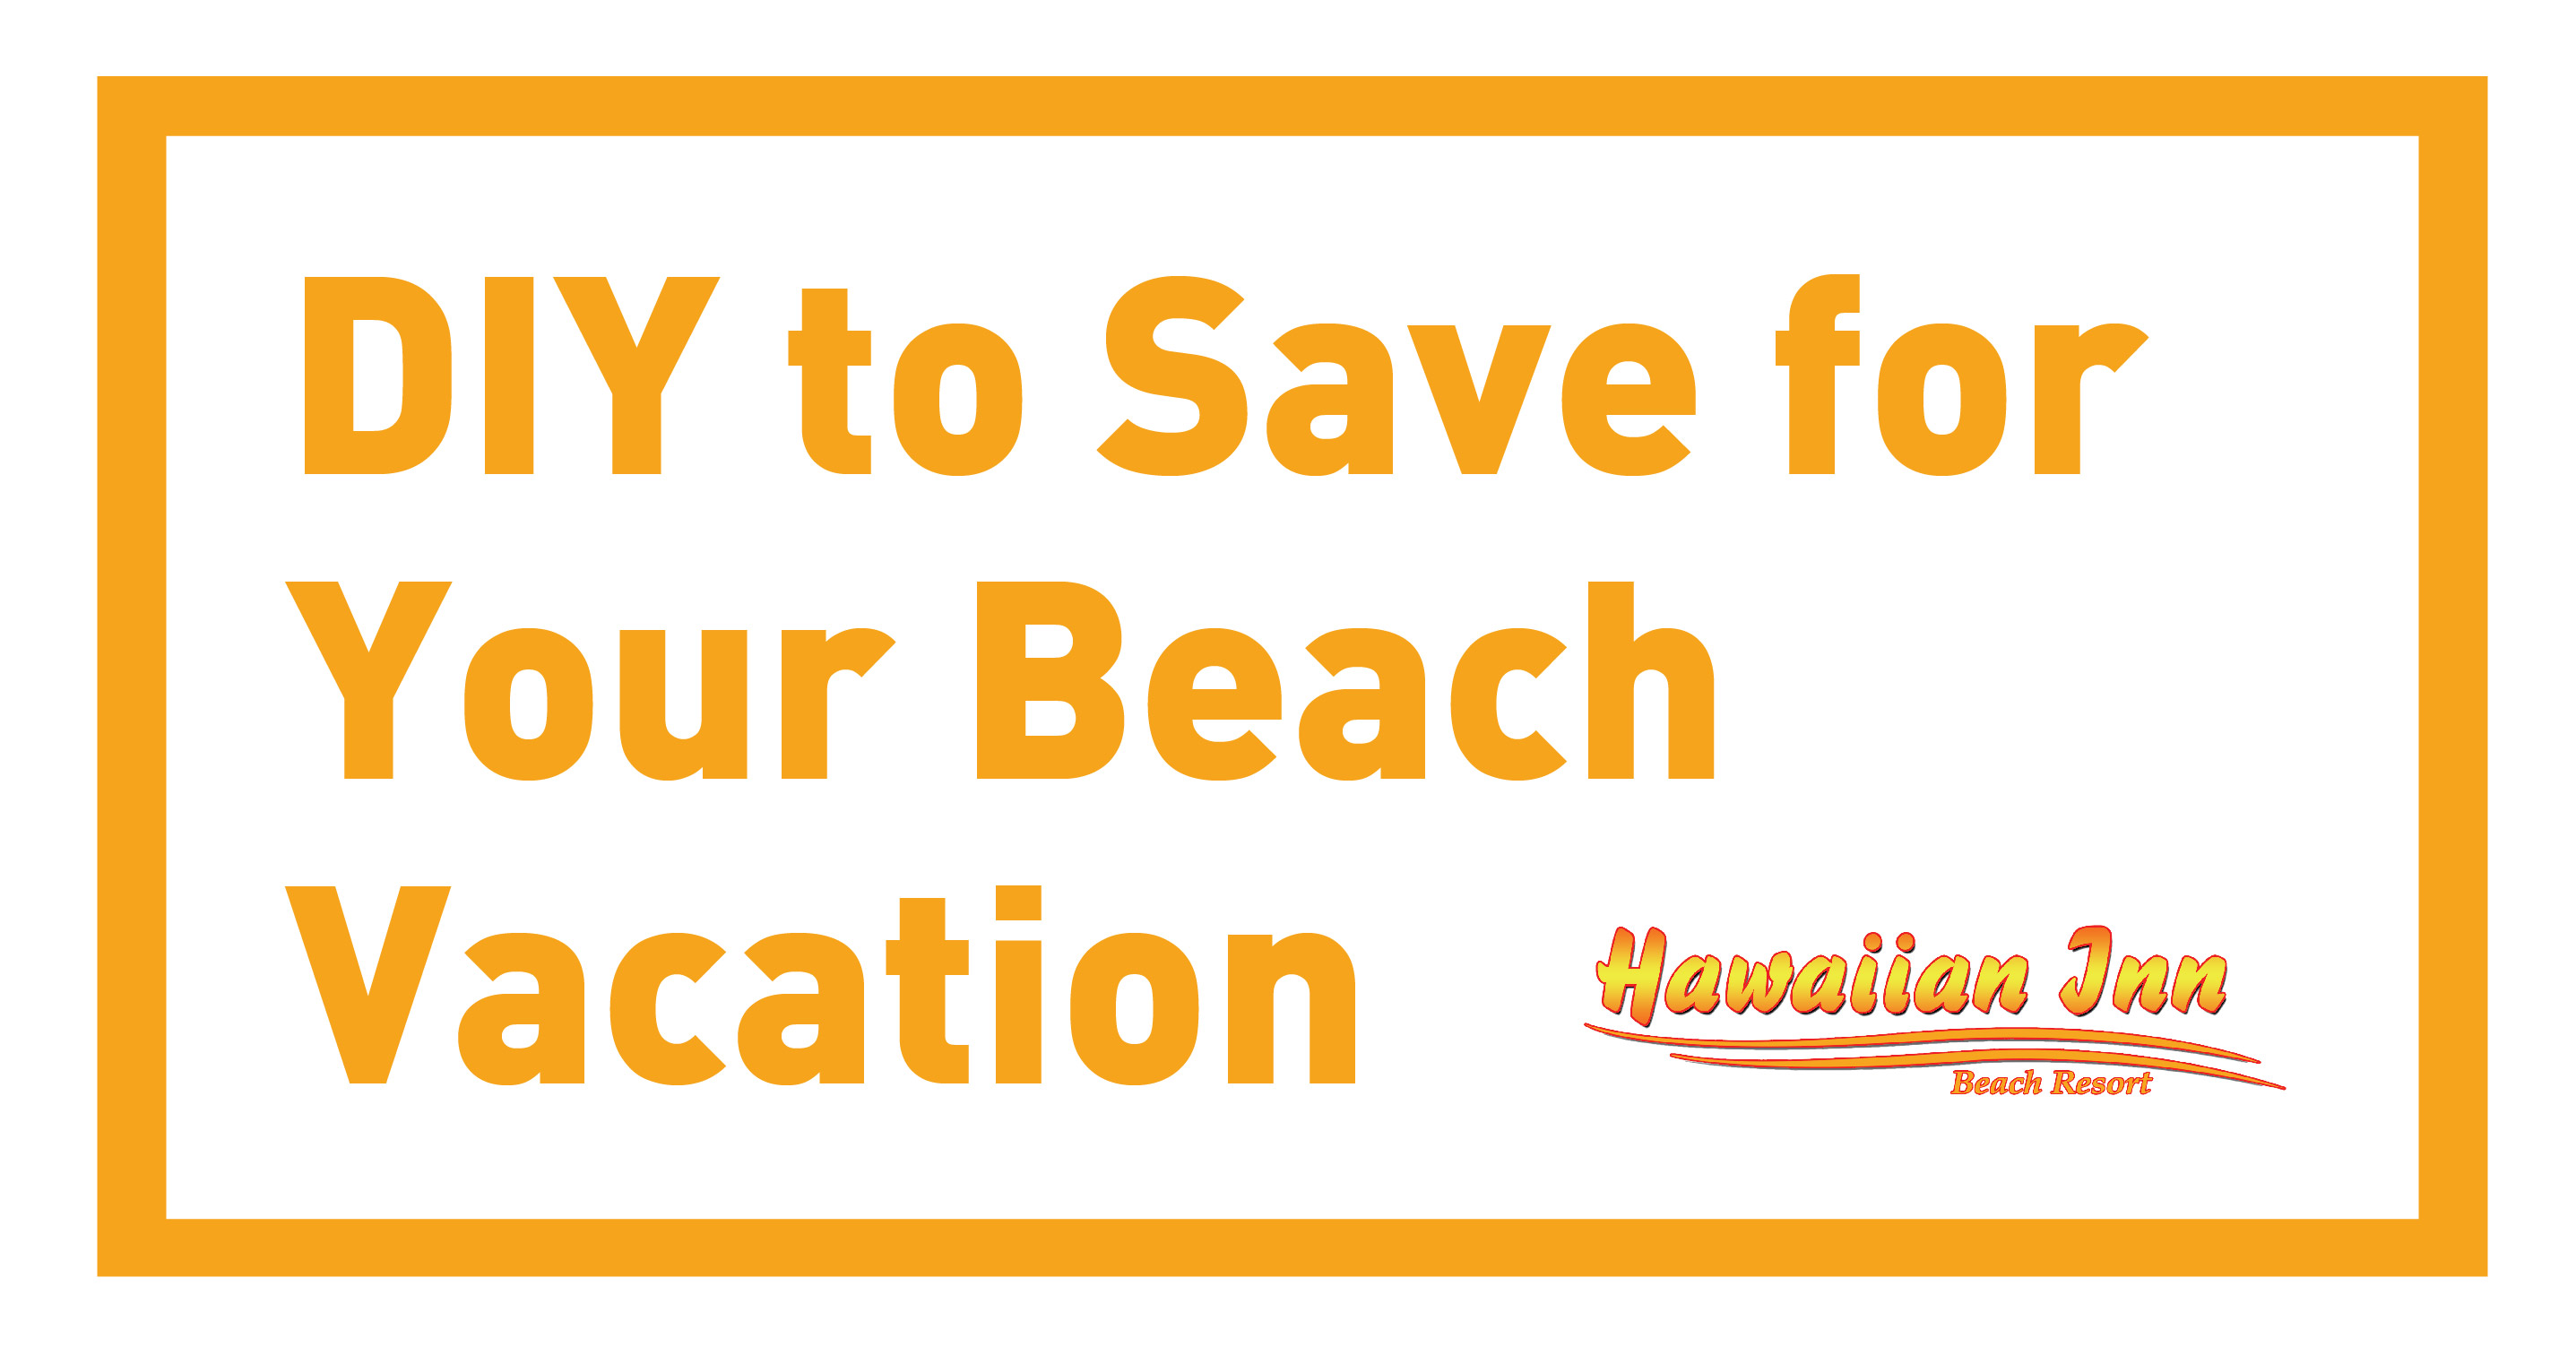 DIY to Save for Your Beach Vacation